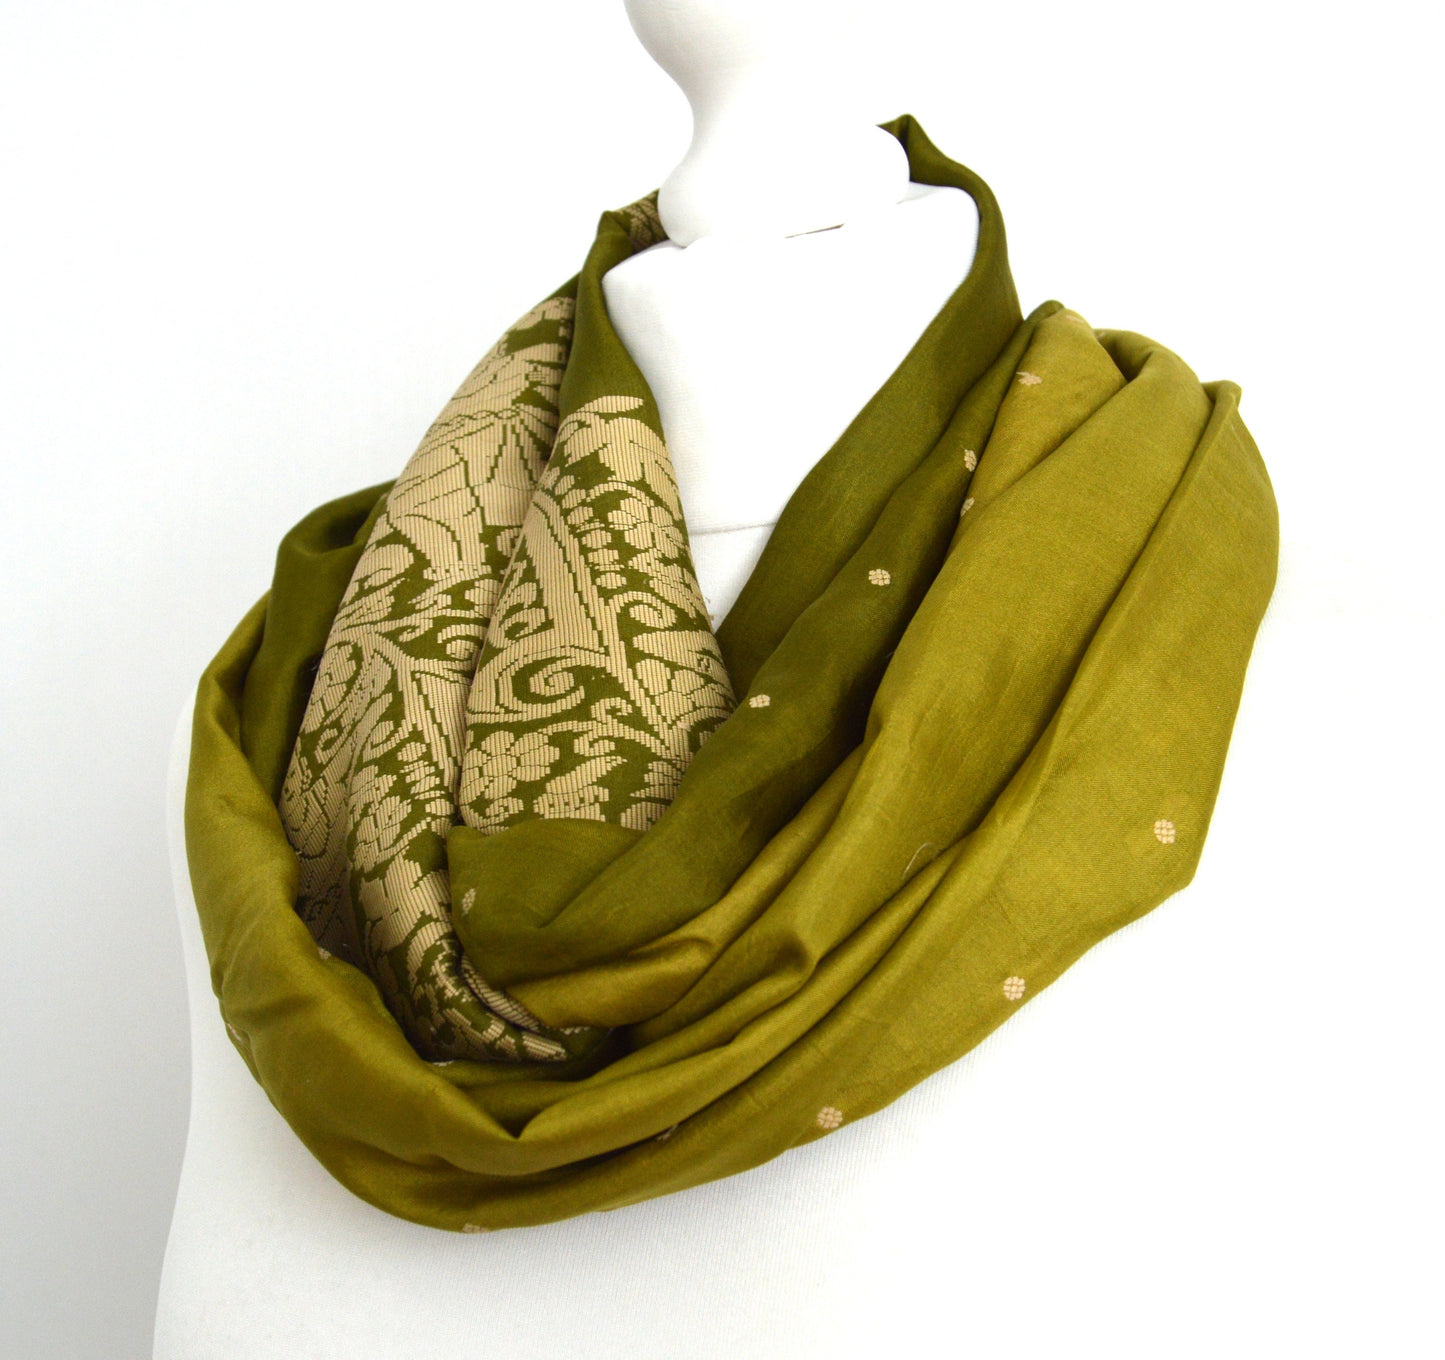 Beige Olive Silk Scarf - Eternity Scarf - Loop Scarf - Womens Scarf - Unisex Scarf - Gift for Her - Gift for Him - Green Silk Scarf - OOAK